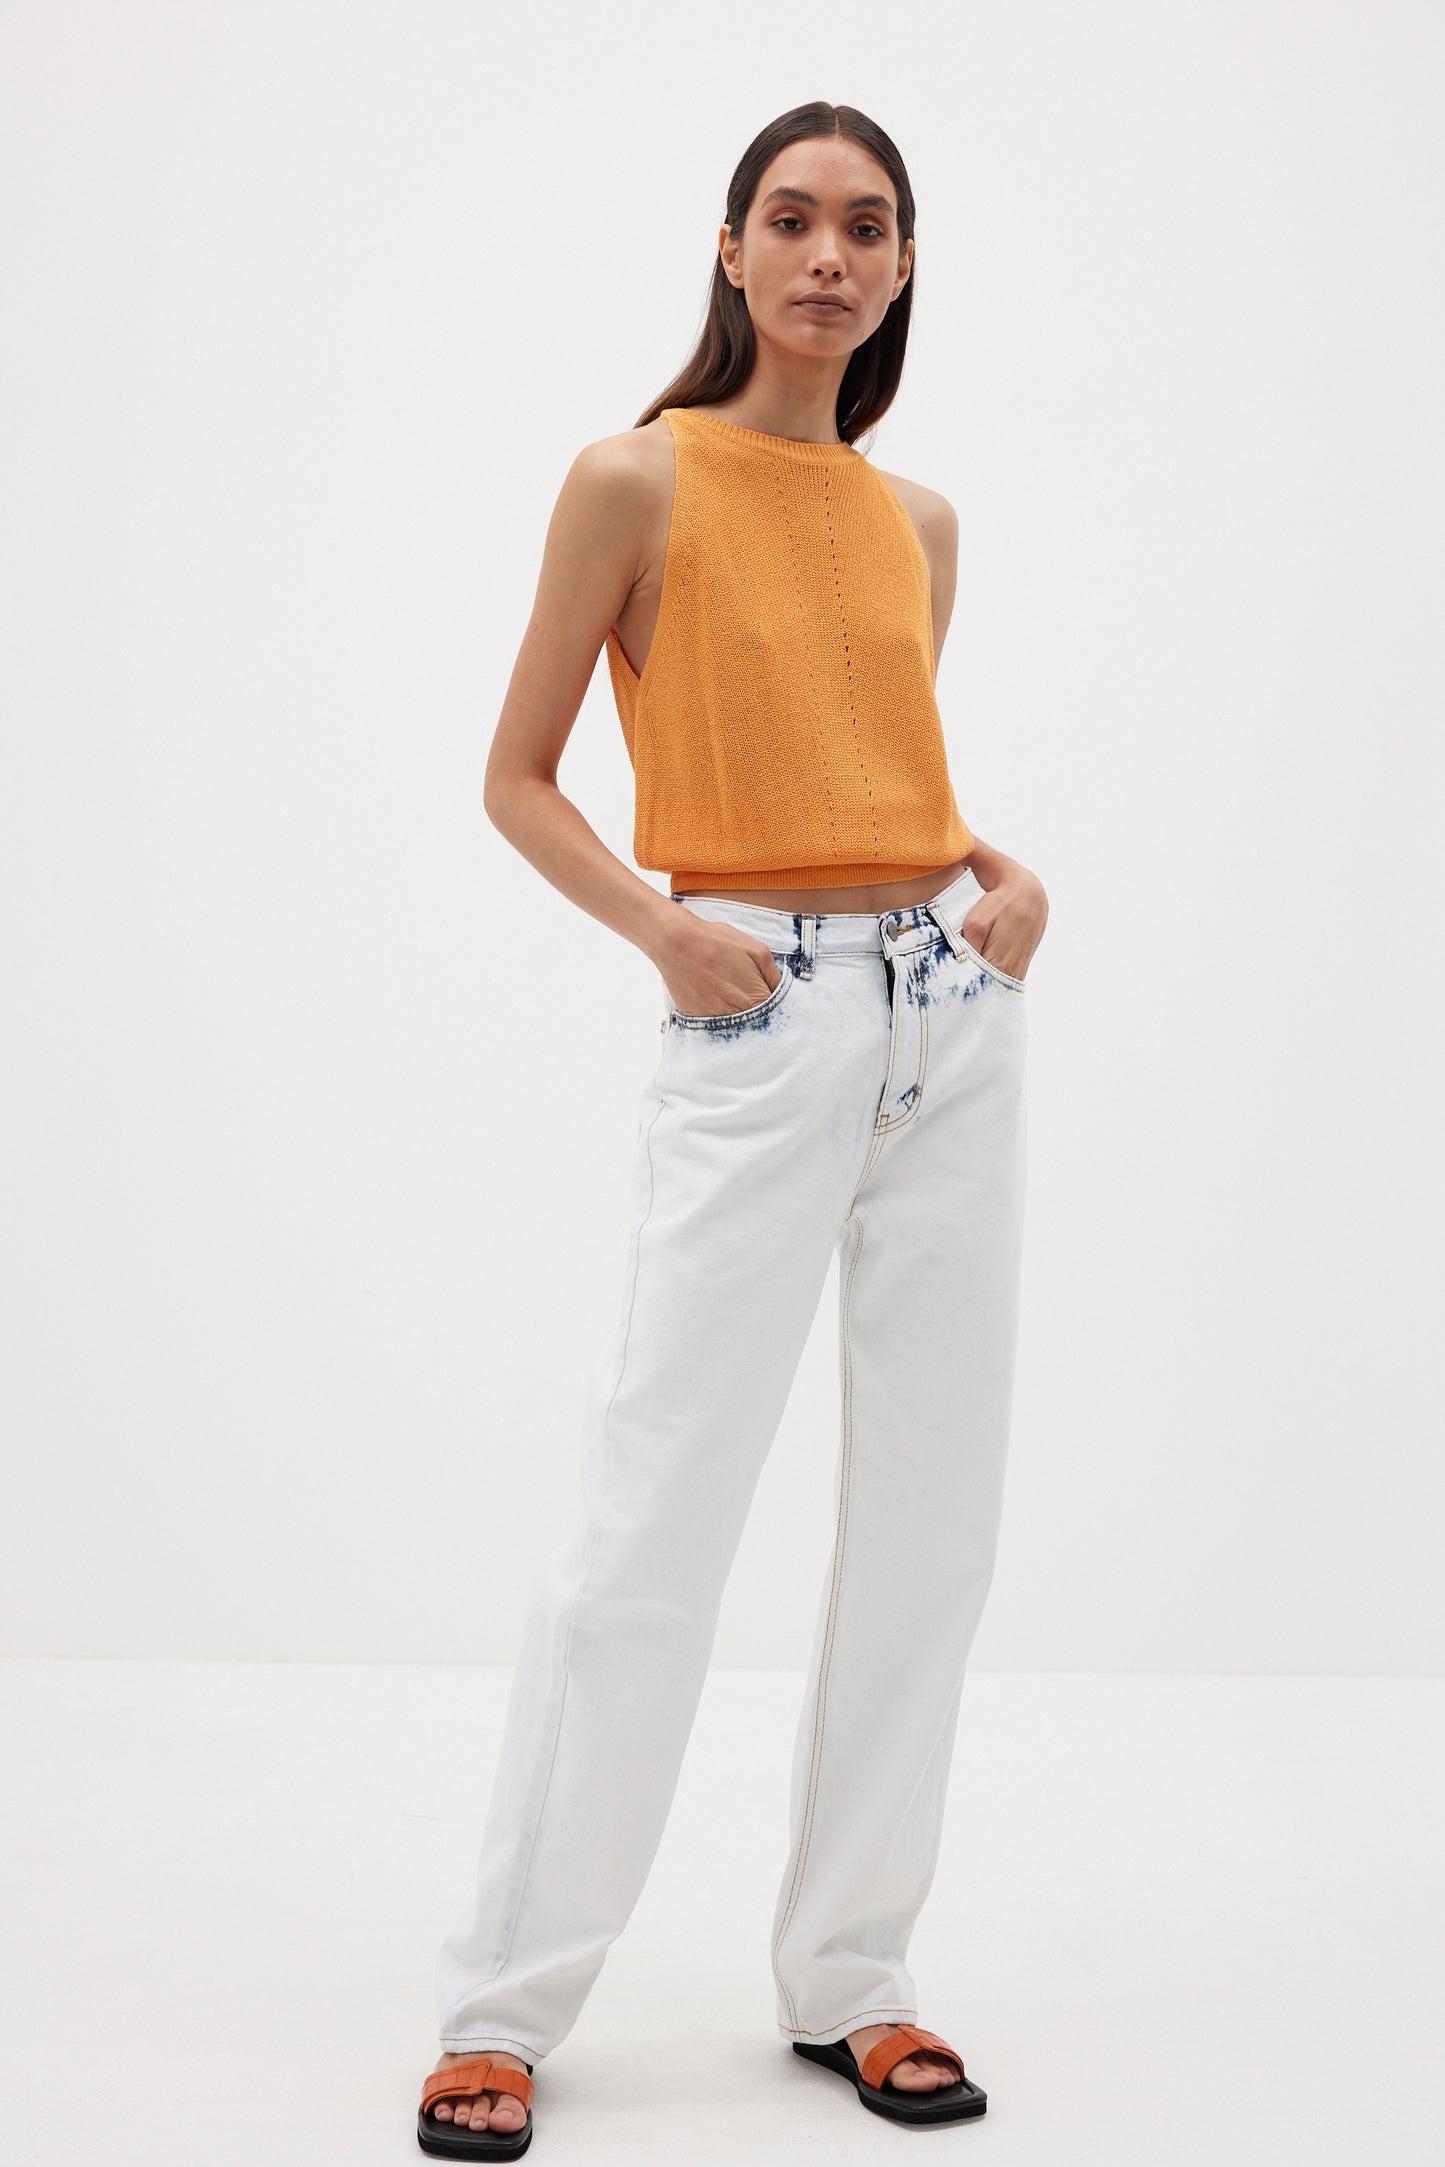 Relaxed Sleeveless Knit Top, Tangerine